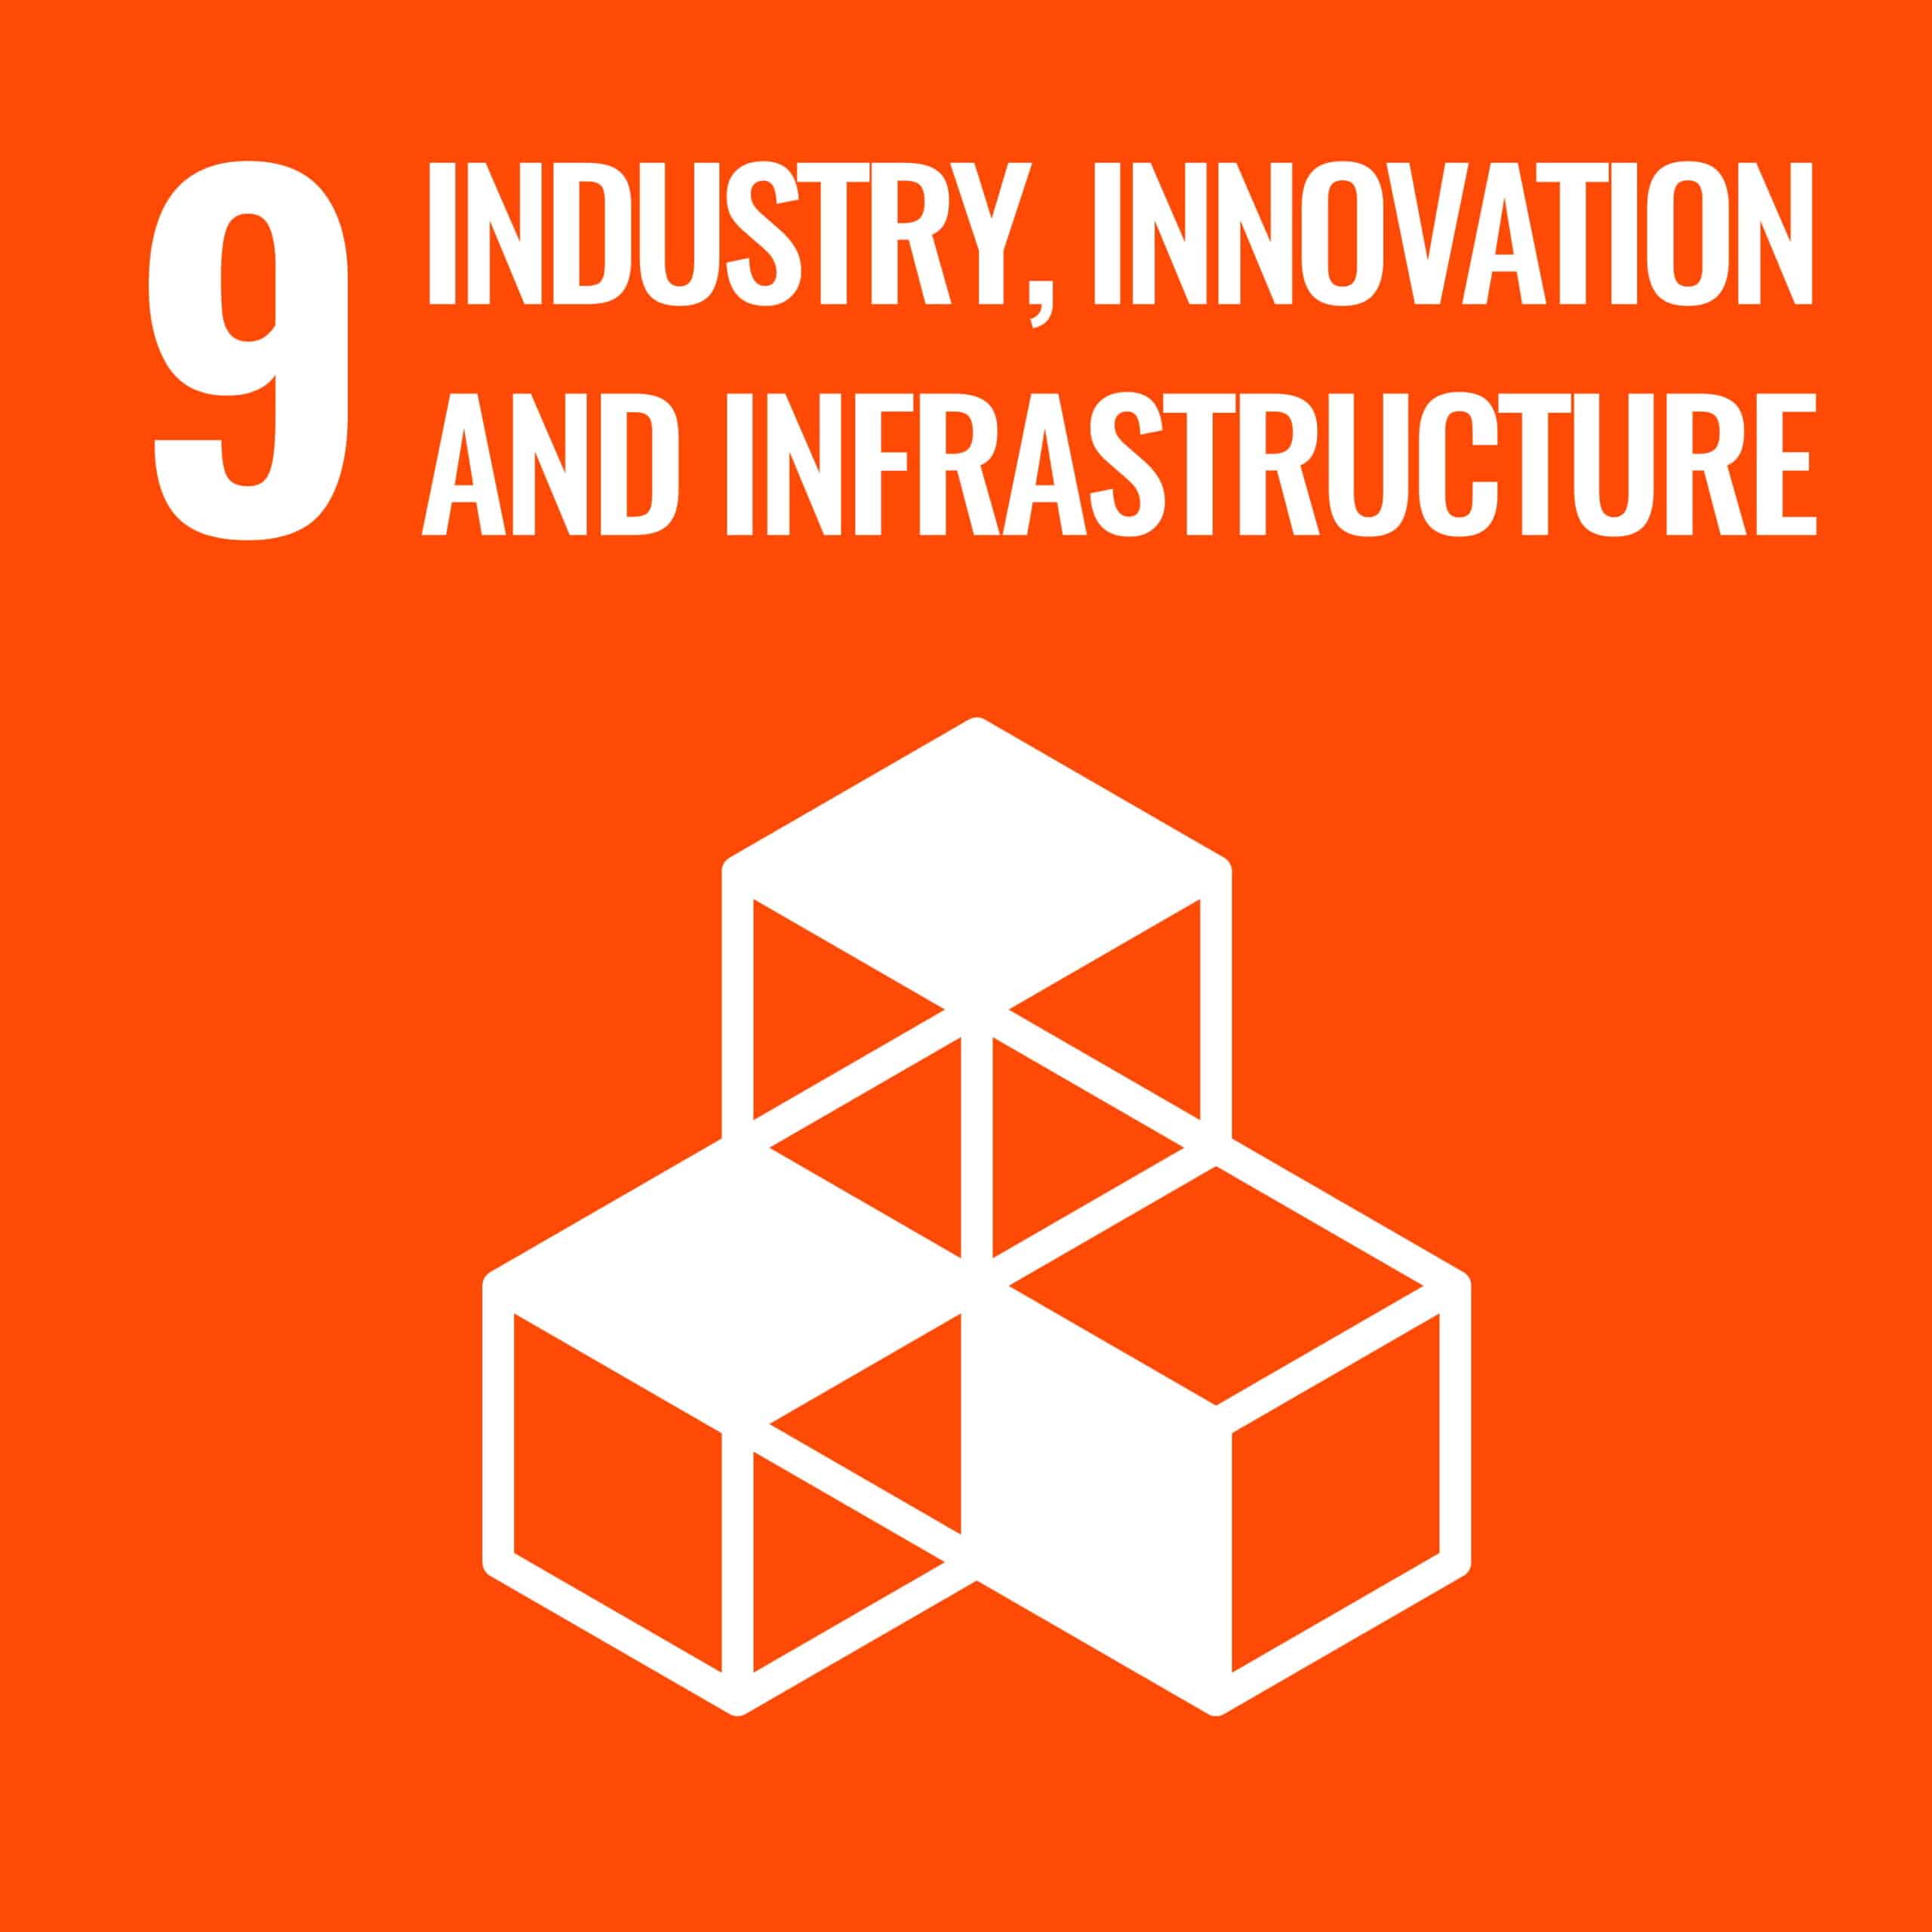 9 Industry innovation and infrastructure